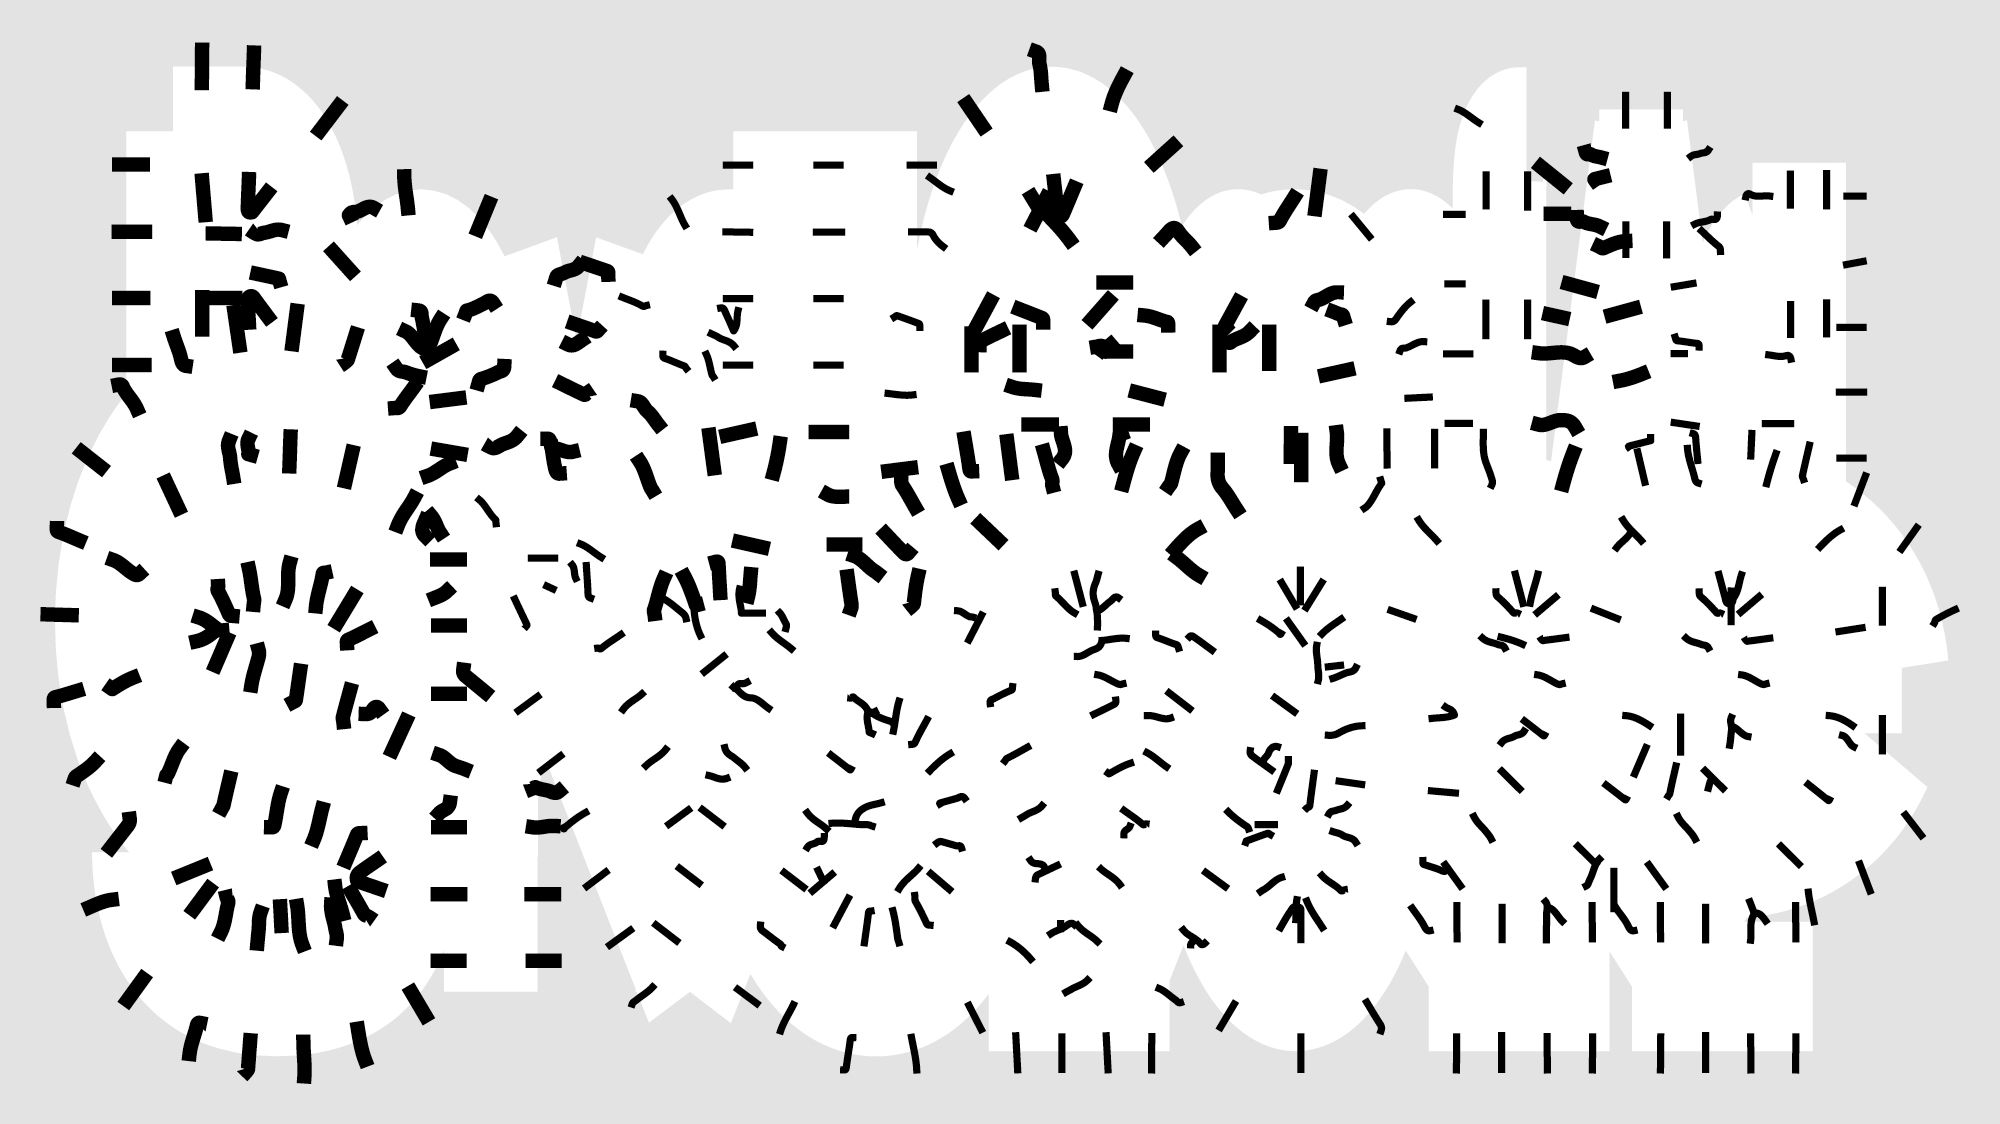 A graphic of a jumble of white shapes that resemble some letters, outlined with small black dashes of varying thickness.